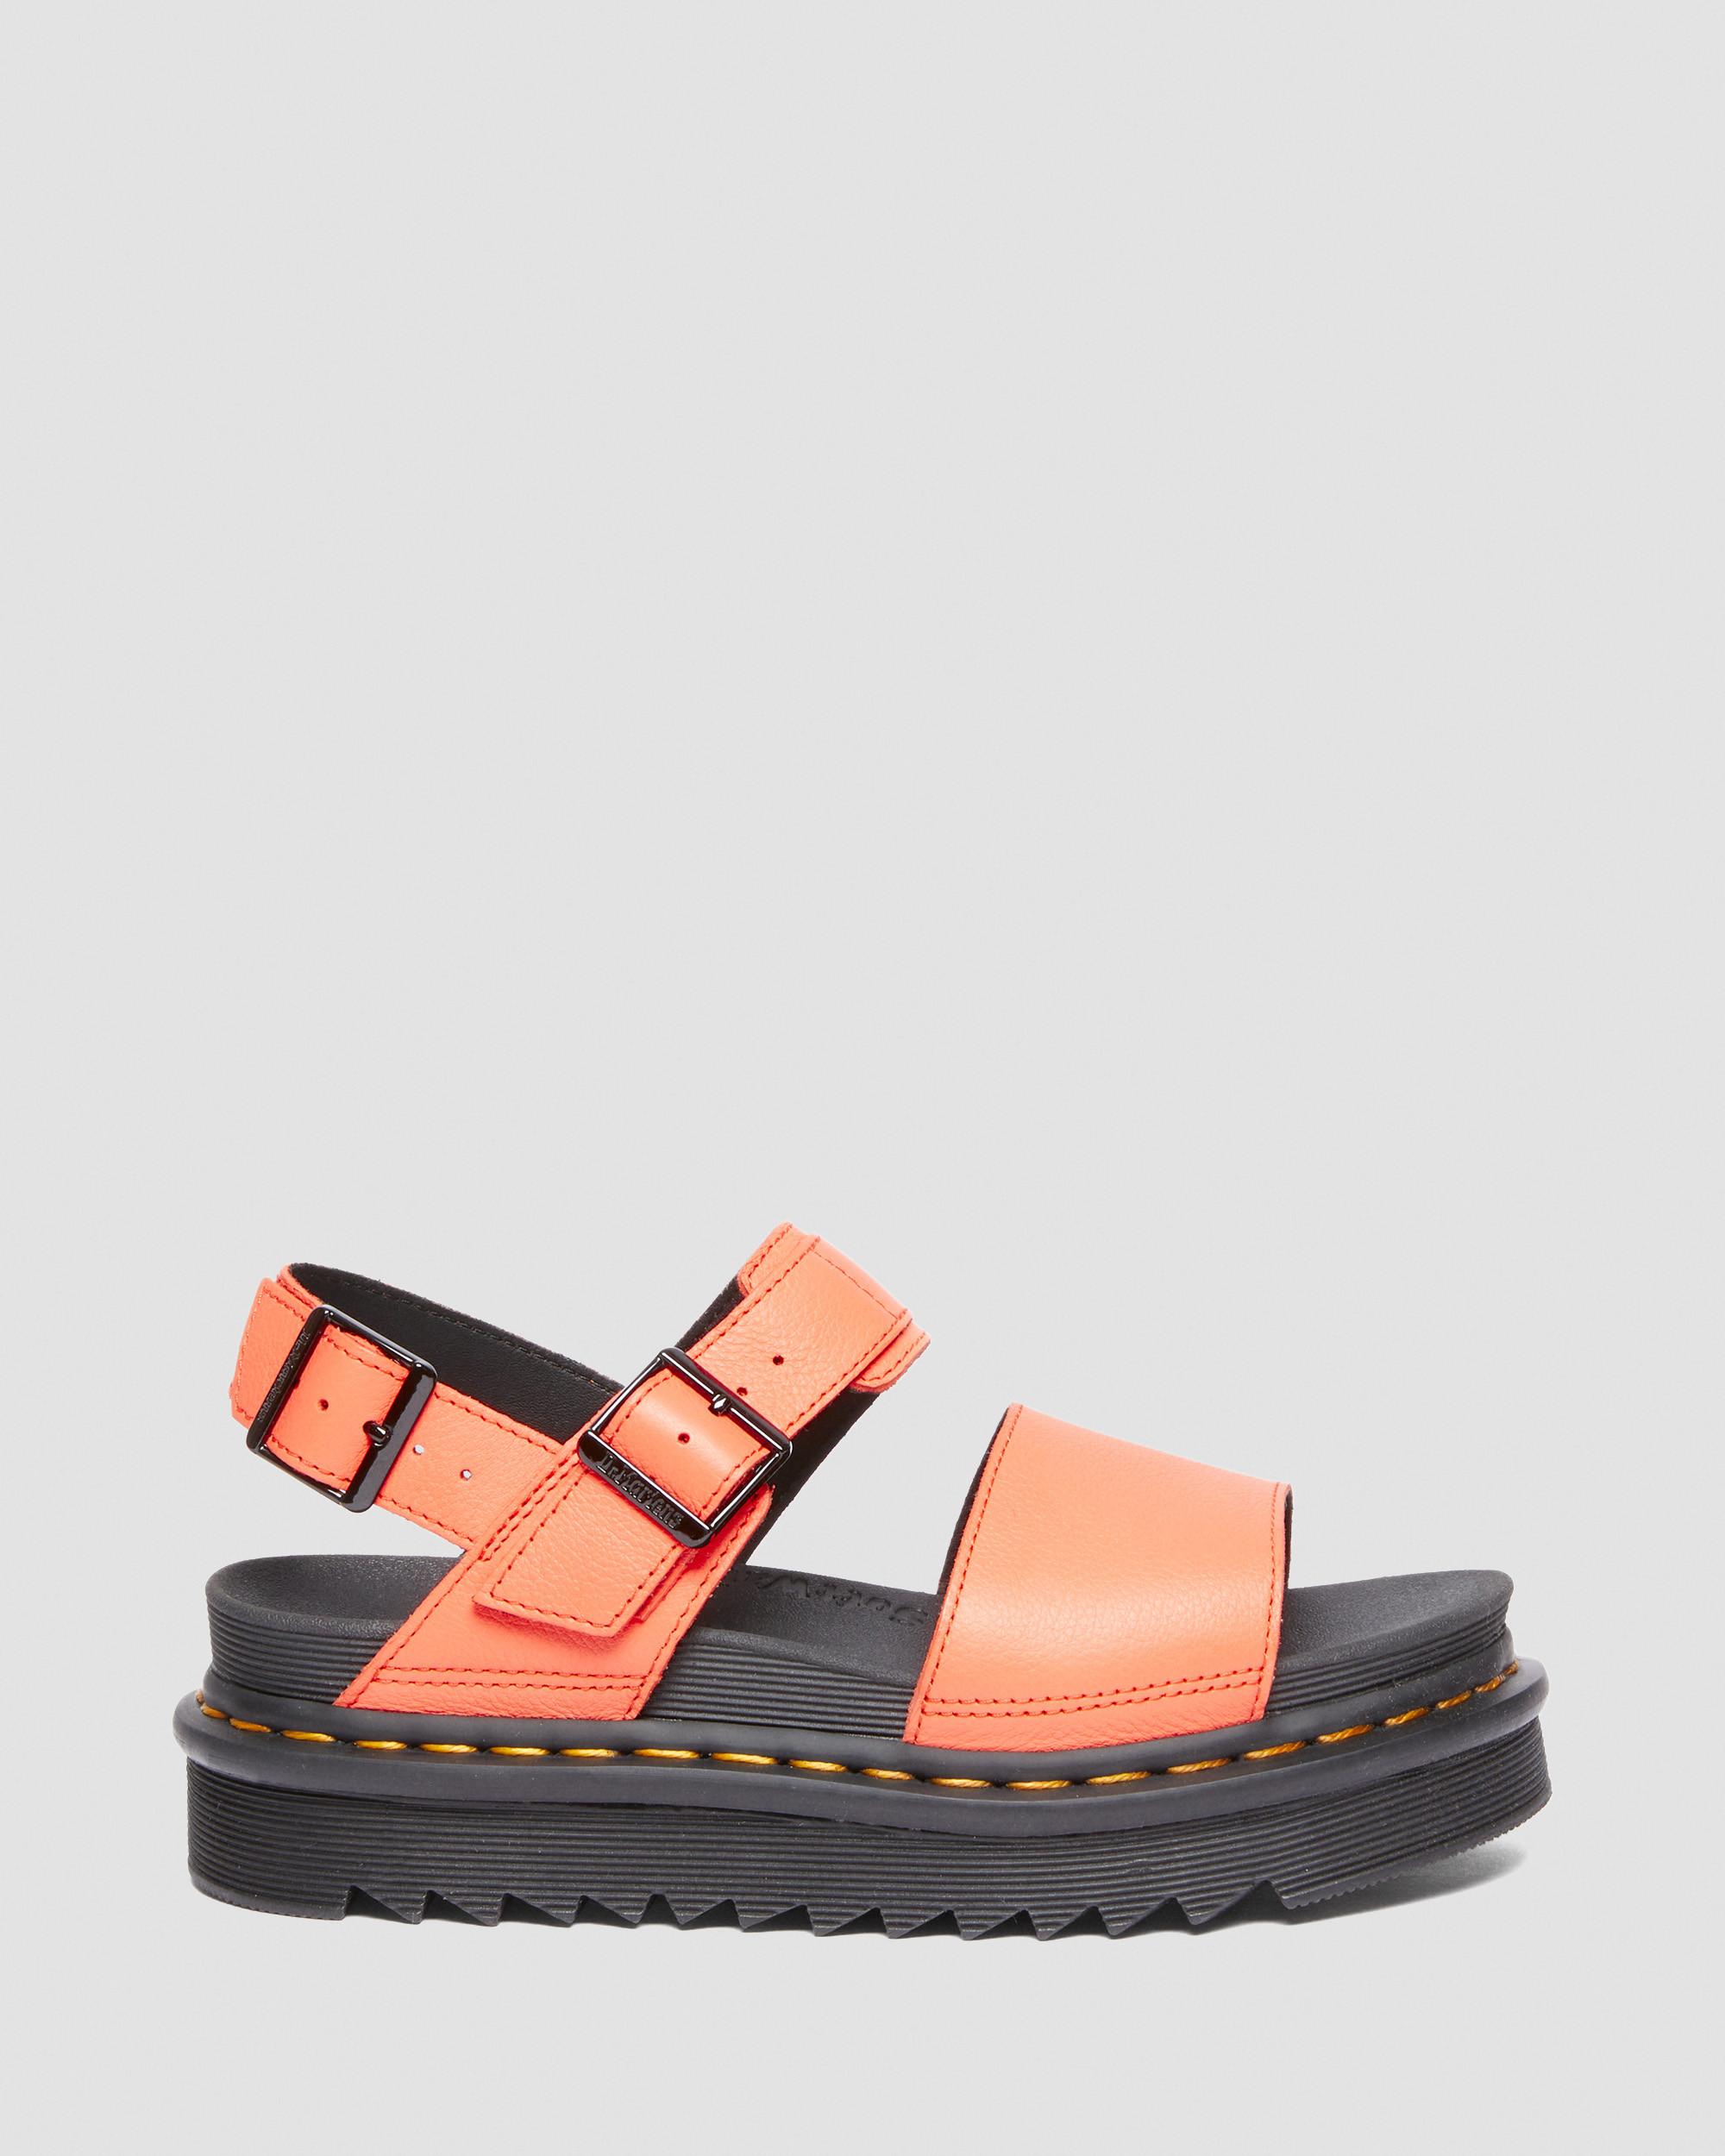 Voss Pisa Leather Strap Sandals in Coral | Dr. Martens